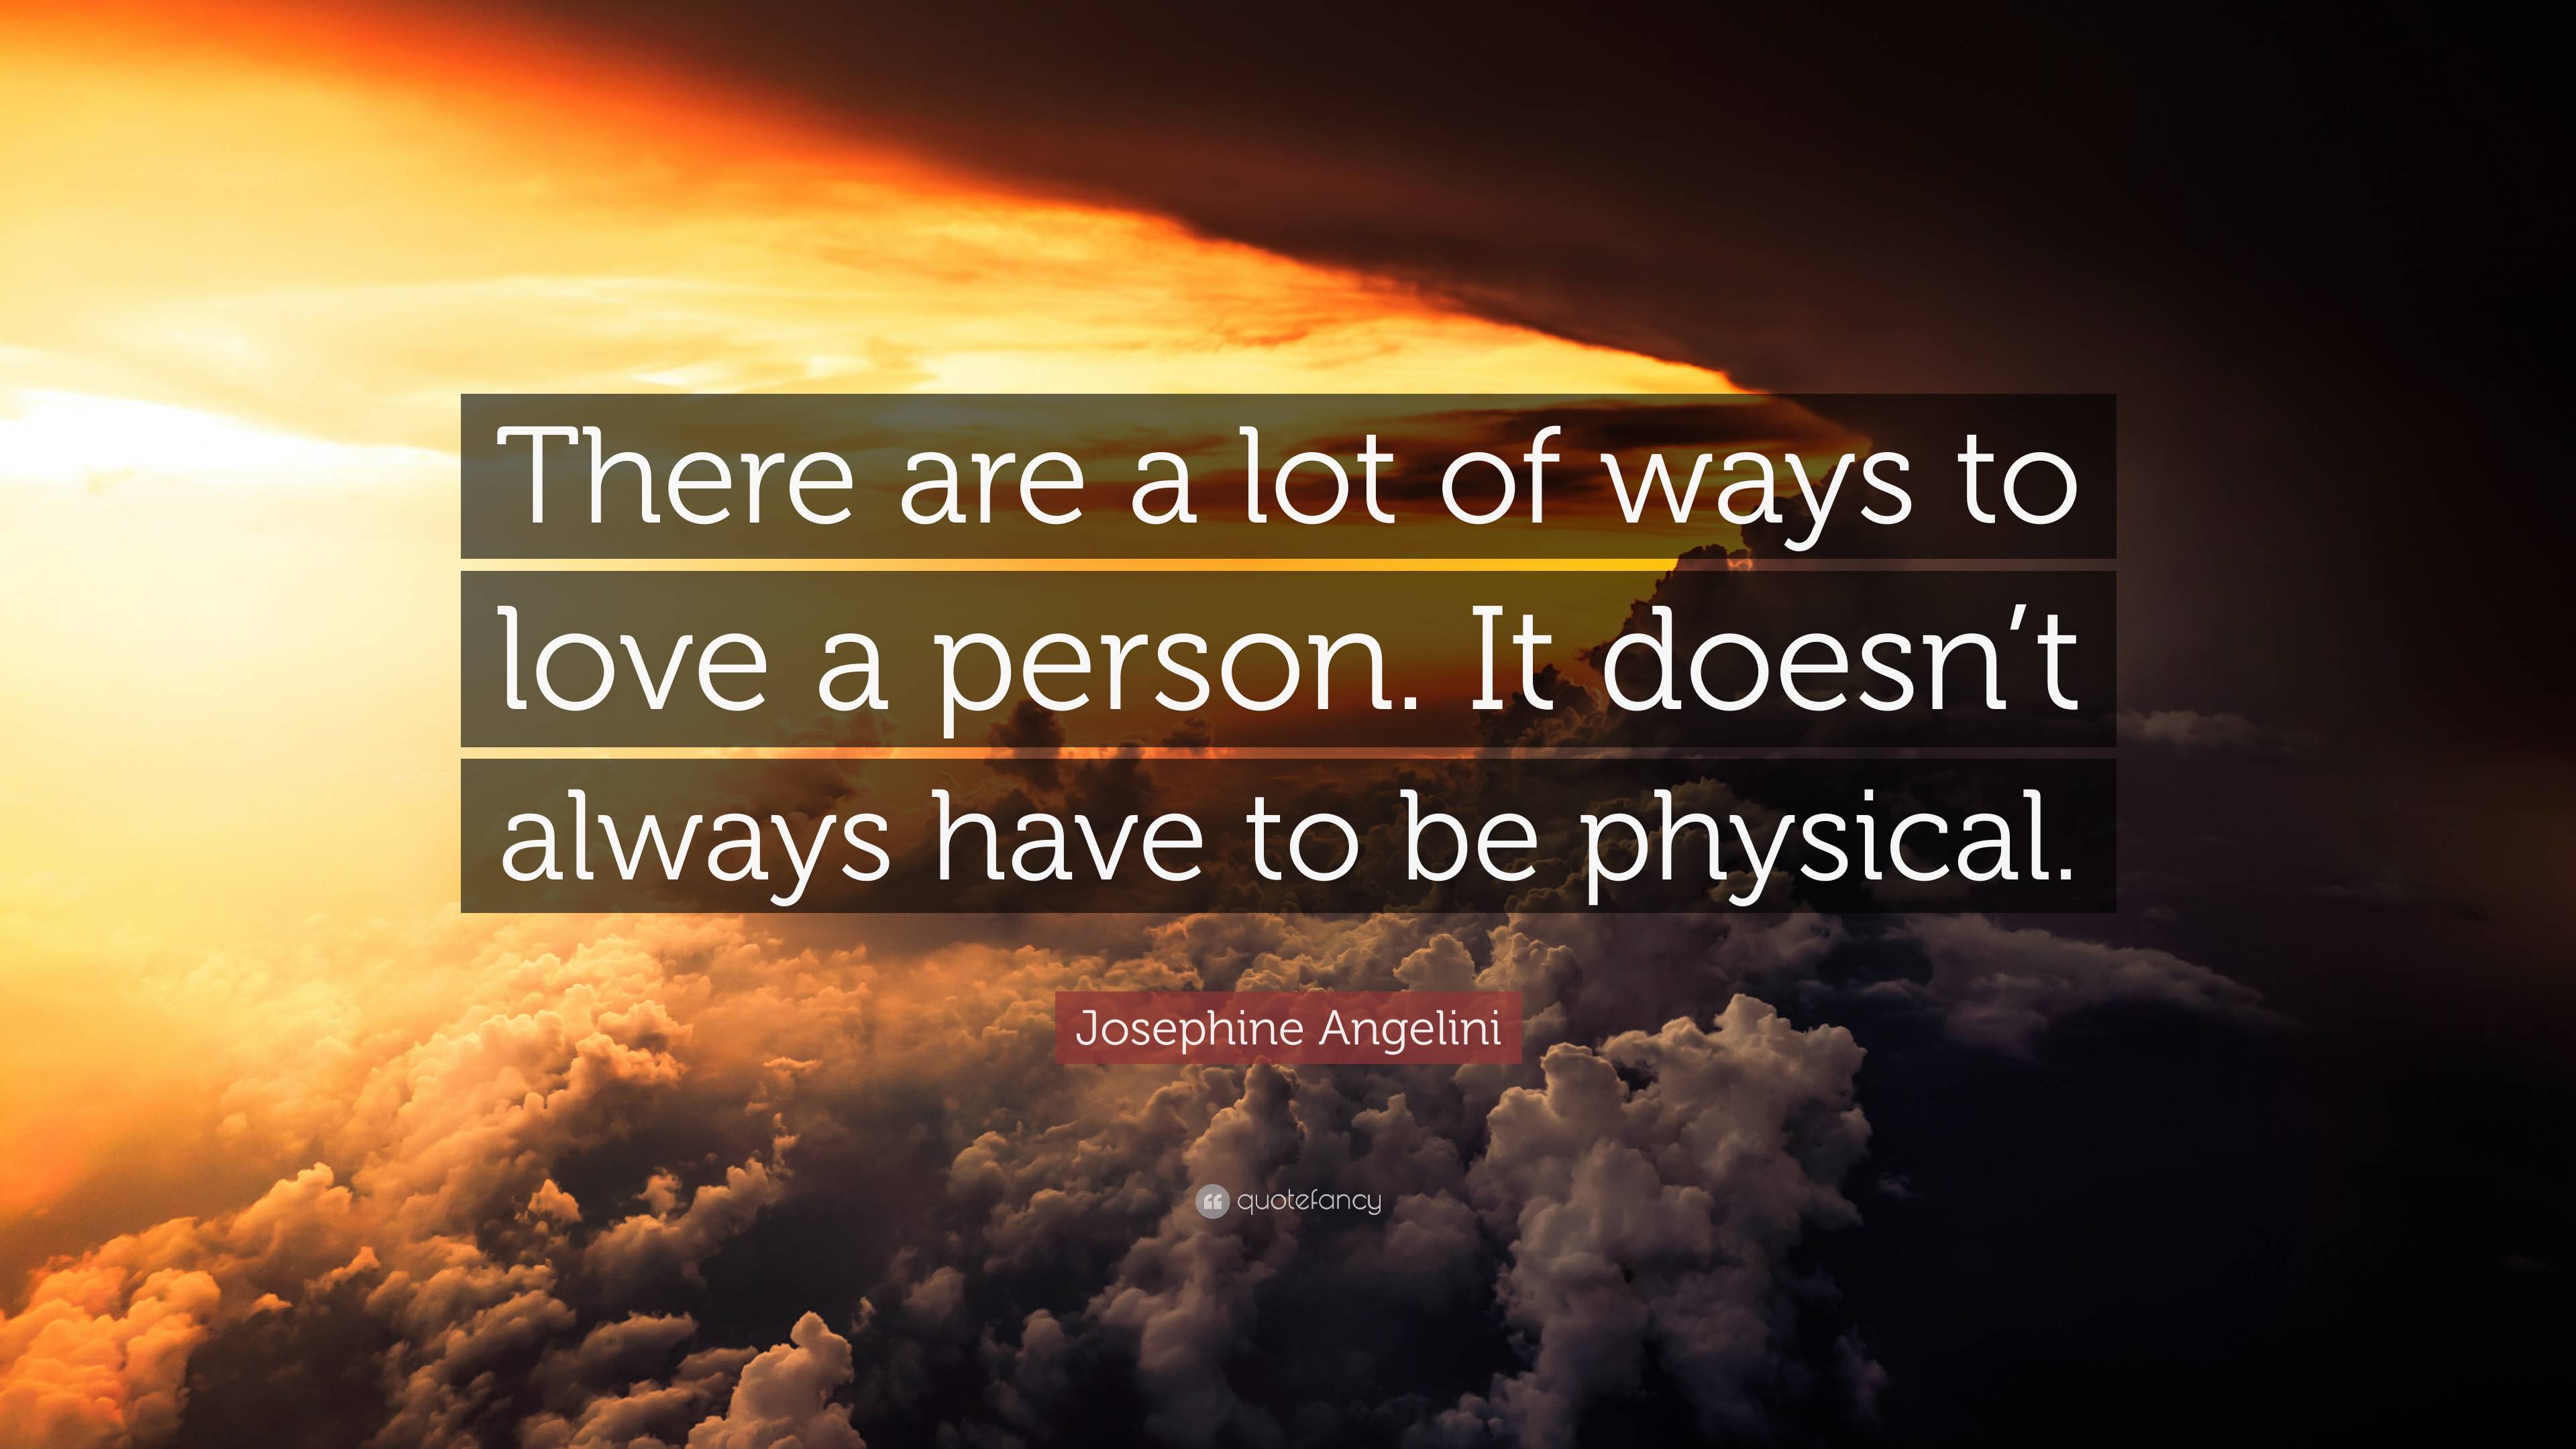 Josephine Angelini Quote: “There are a lot of ways to love a person. It ...